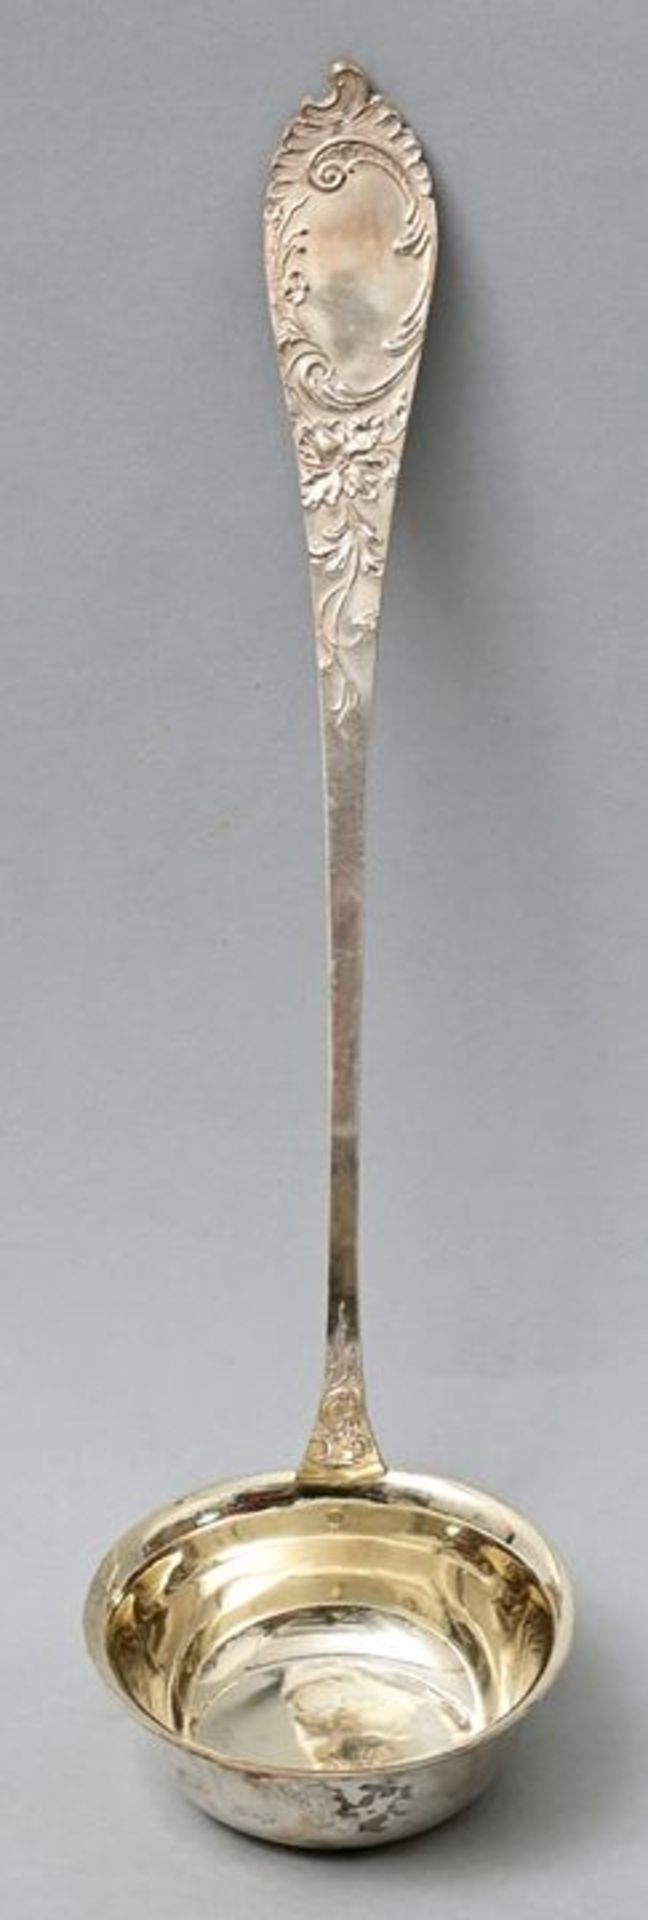 Suppenkelle Silber/ silver ladle